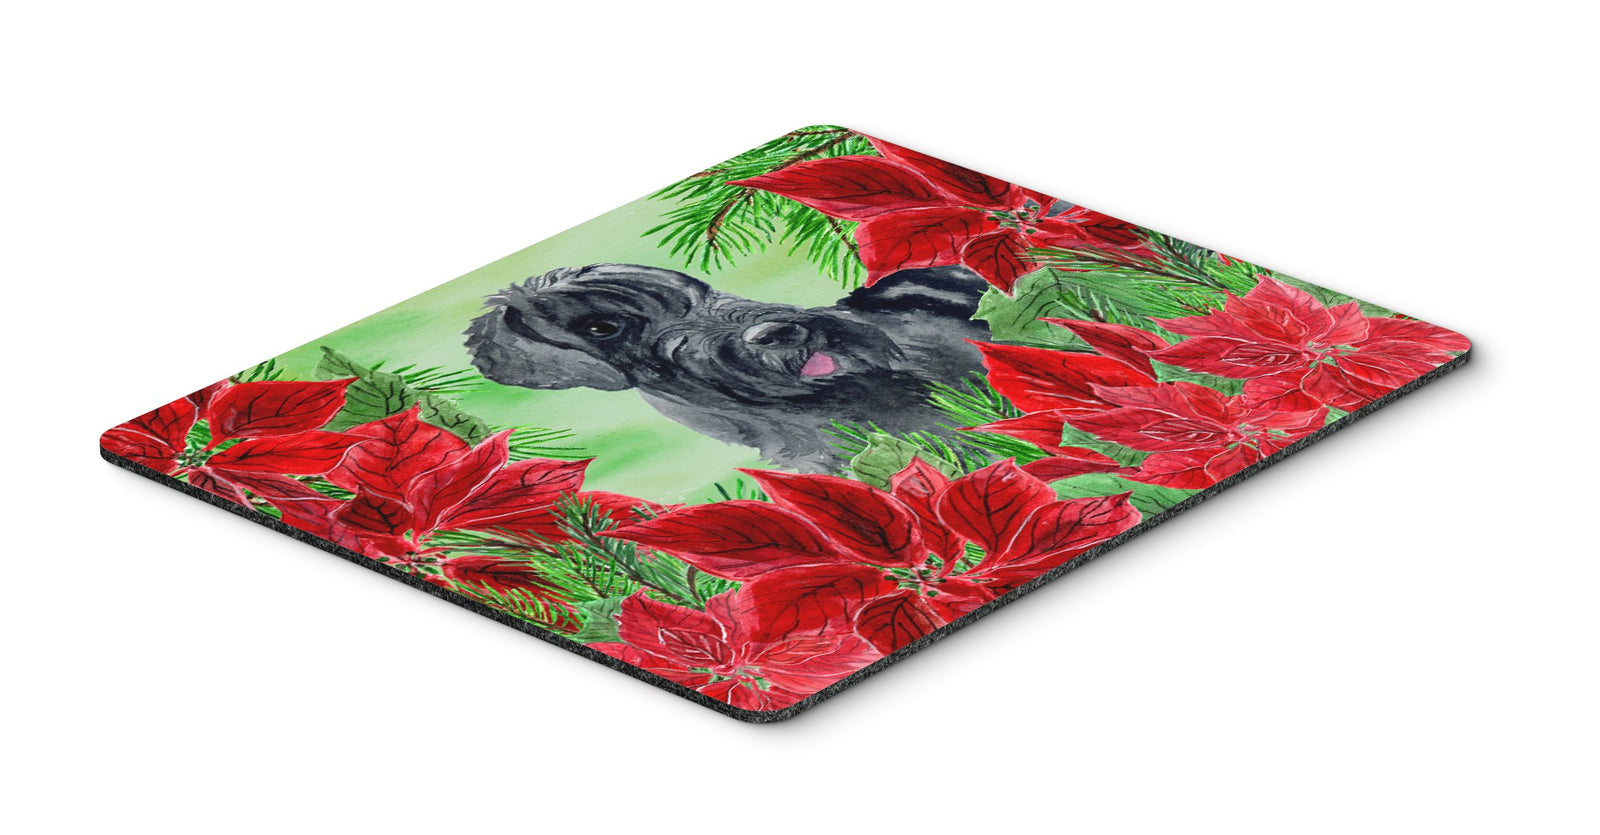 Giant Schnauzer Poinsettas Mouse Pad, Hot Pad or Trivet CK1308MP by Caroline's Treasures